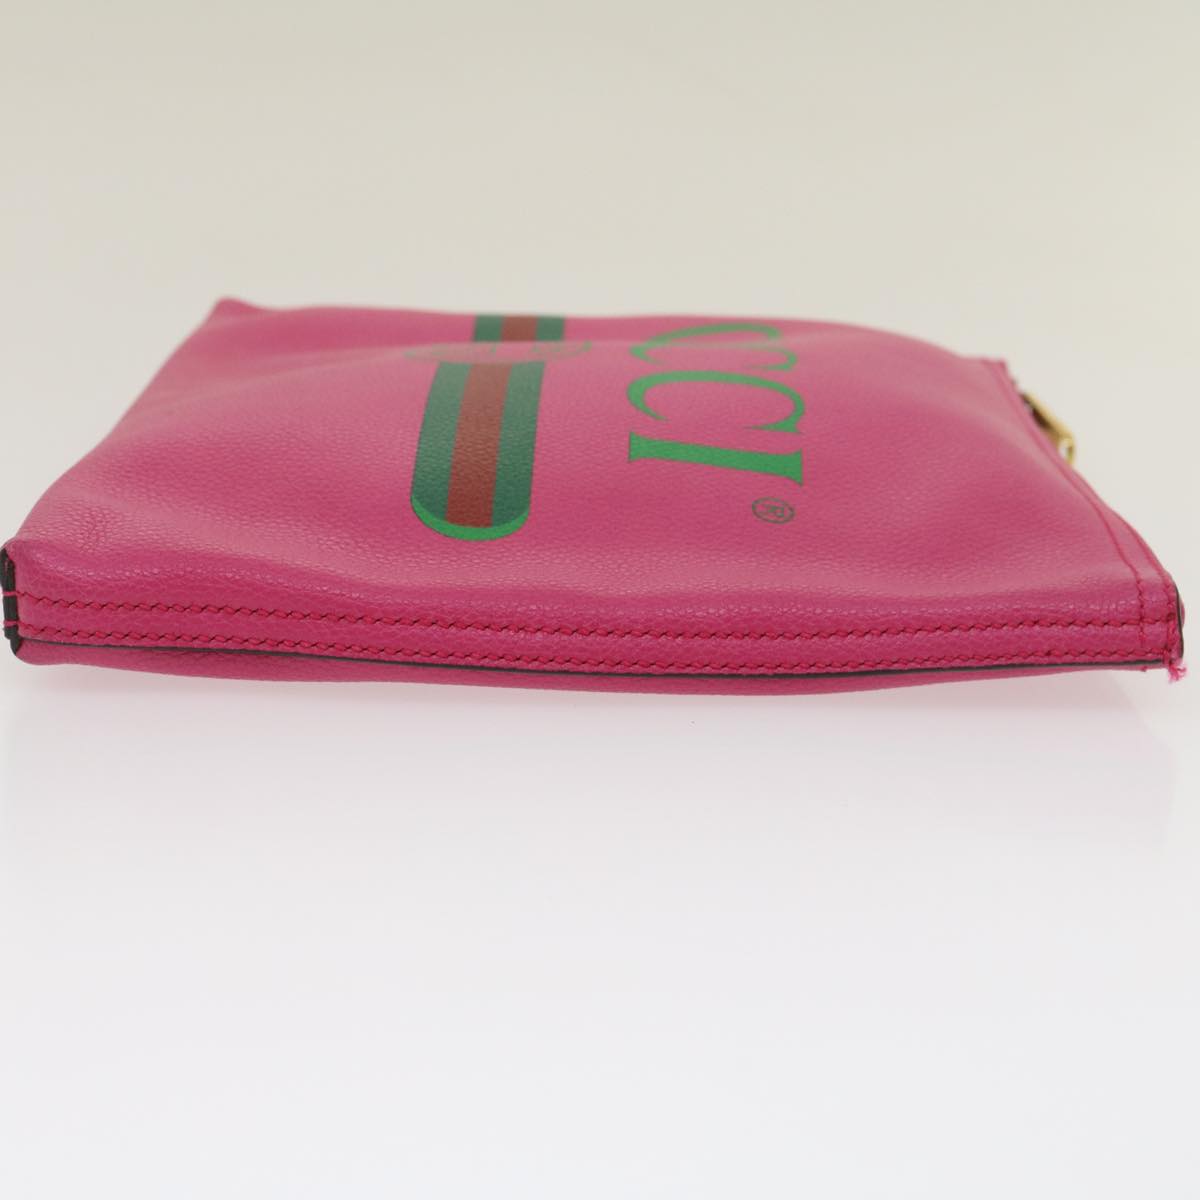 GUCCI Web Sherry Line Soho Clutch Bag Leather Pink Auth am2581g